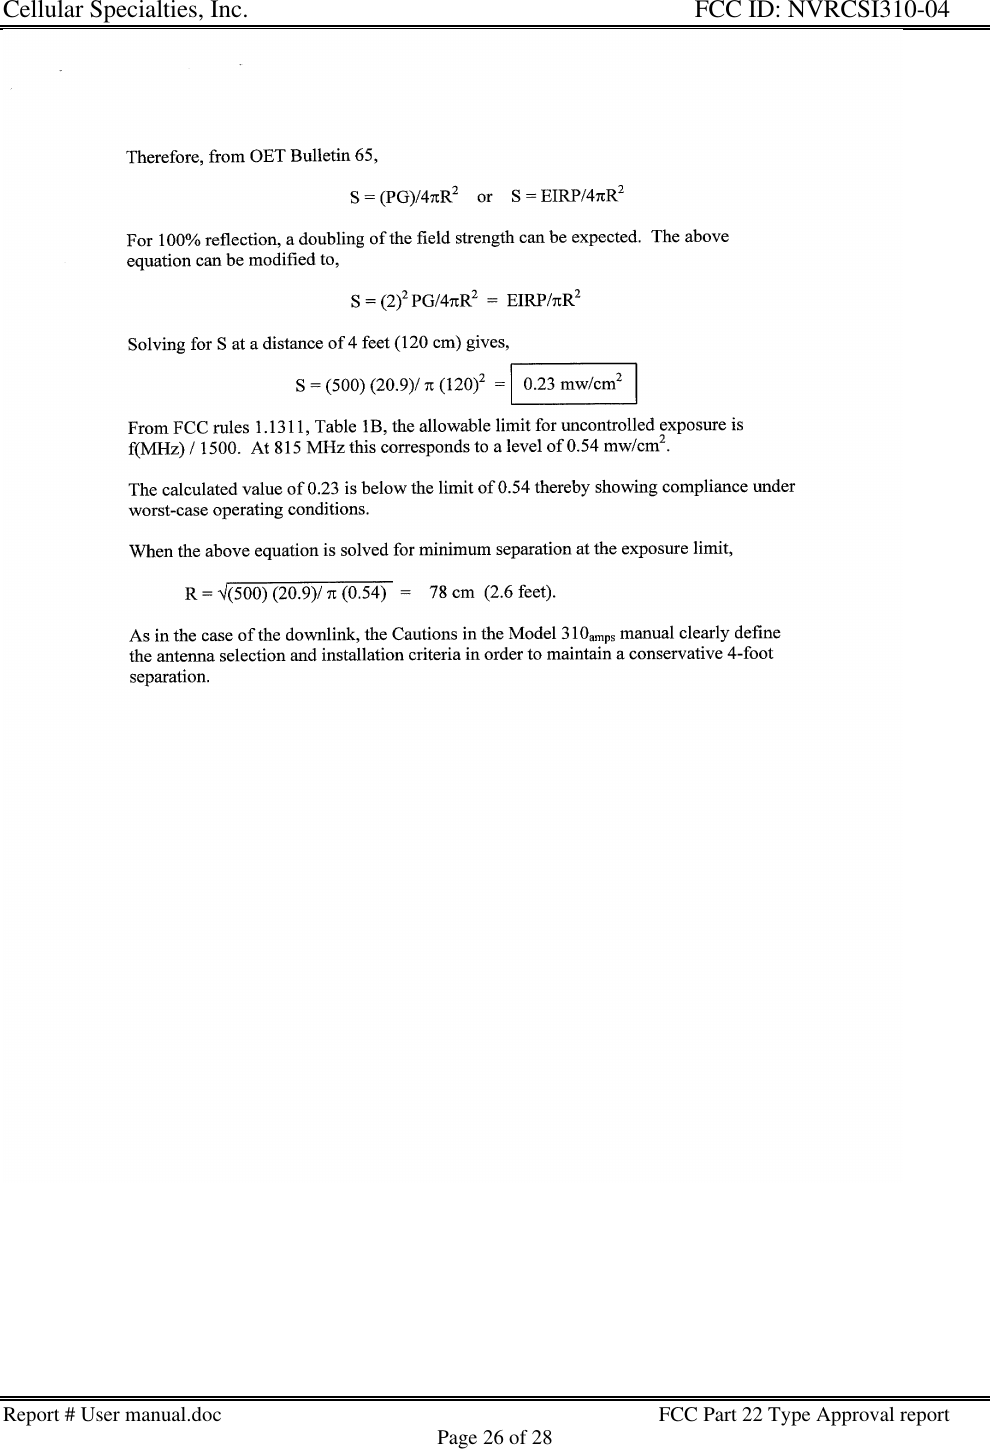 Cellular Specialties, Inc. FCC ID: NVRCSI310-04Report # User manual.doc FCC Part 22 Type Approval reportPage 26 of 28